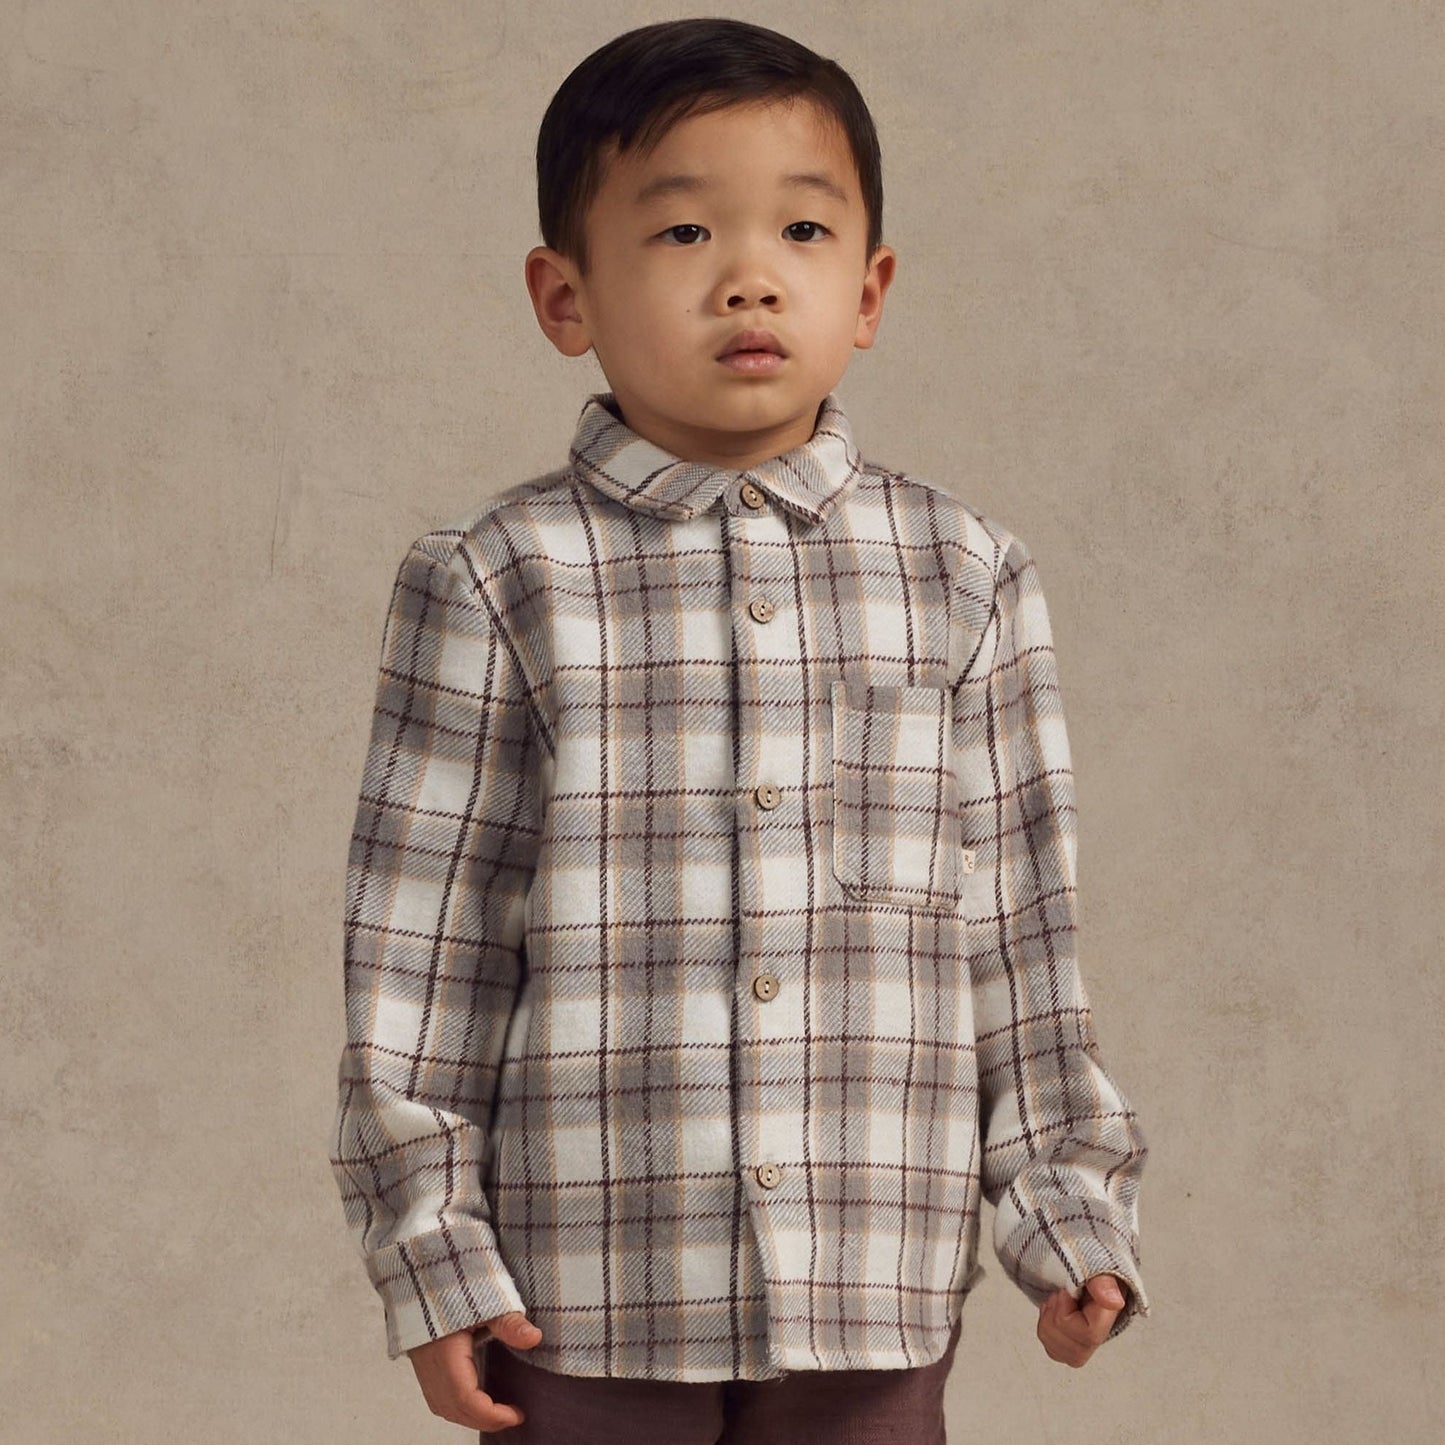 Boy wearing Rylee and Cru Collared Long Sleeve Shirt - French Blue Flannel Lifestyle